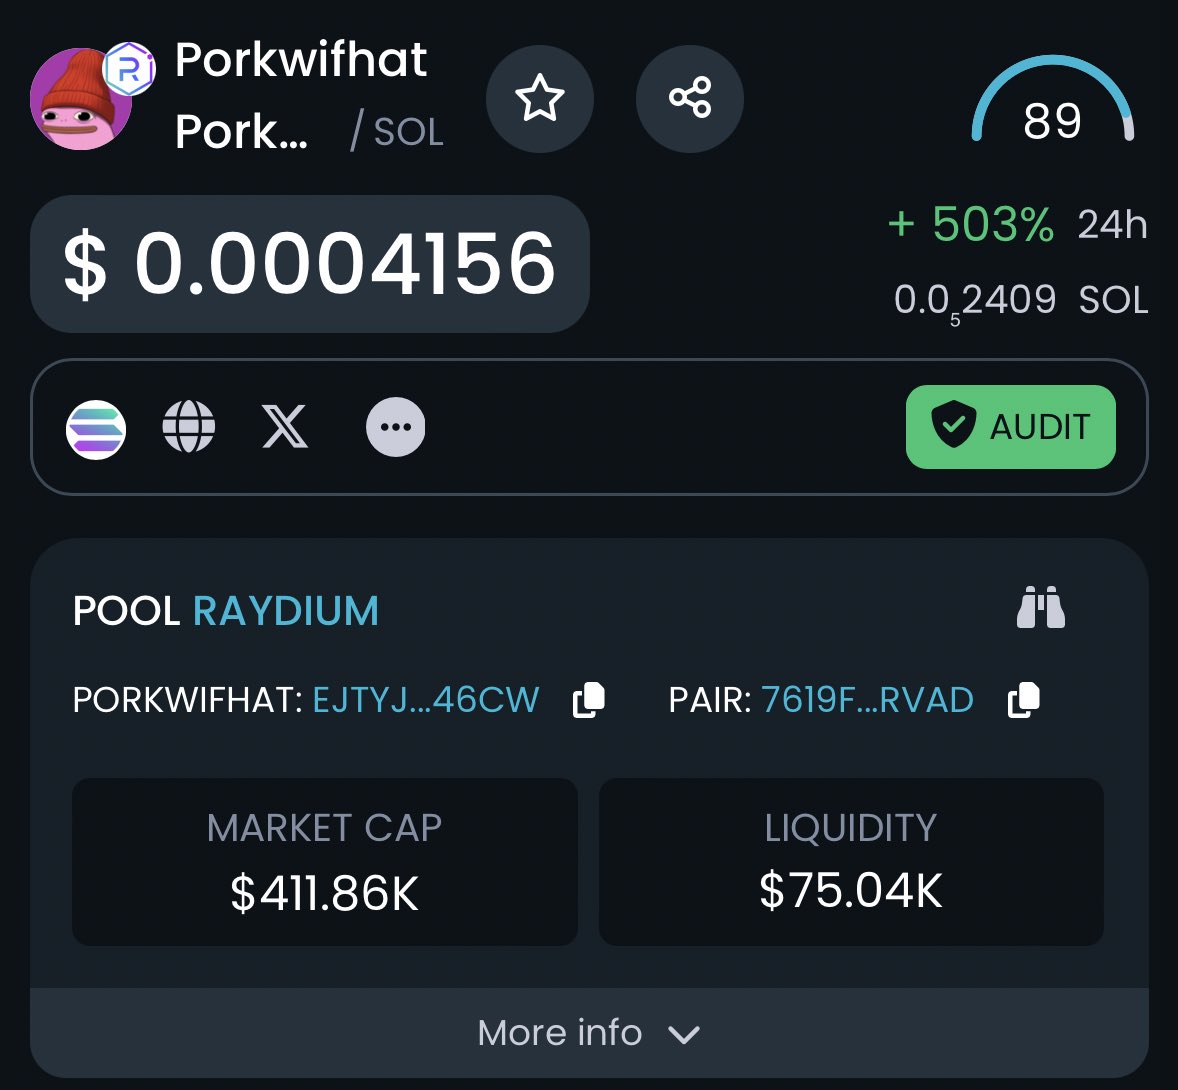 DEXTOOLS HAS BEEN UPDATED ✅

GAME ON $PORKWIFHAT 🔥🔥🚀🚀